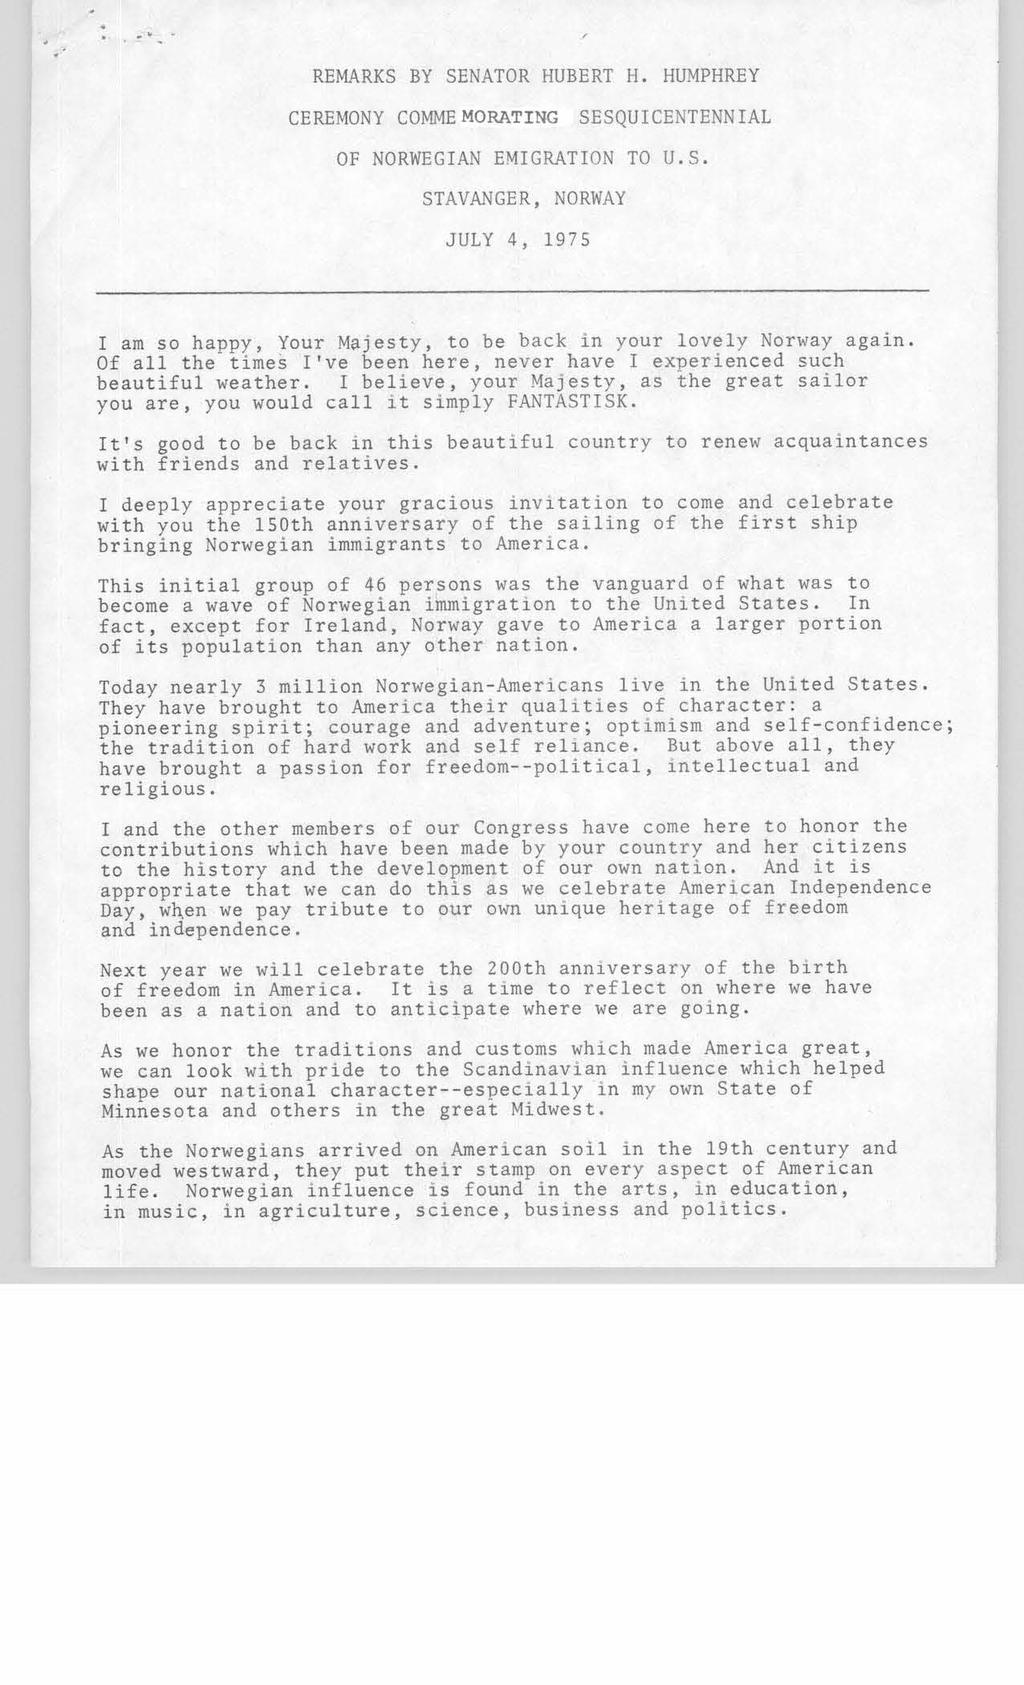 REMARKS BY SENATOR HUBERT H. HUMPHREY CEREMONY COMMEMORATING SESQUICENTENNIAL OF NORWEGIAN EMIGRATION TO U.S. STAVANGER, NORWAY JULY 4, 1975 I am so happy, Your Majesty, to be back in your lovely Norway again.